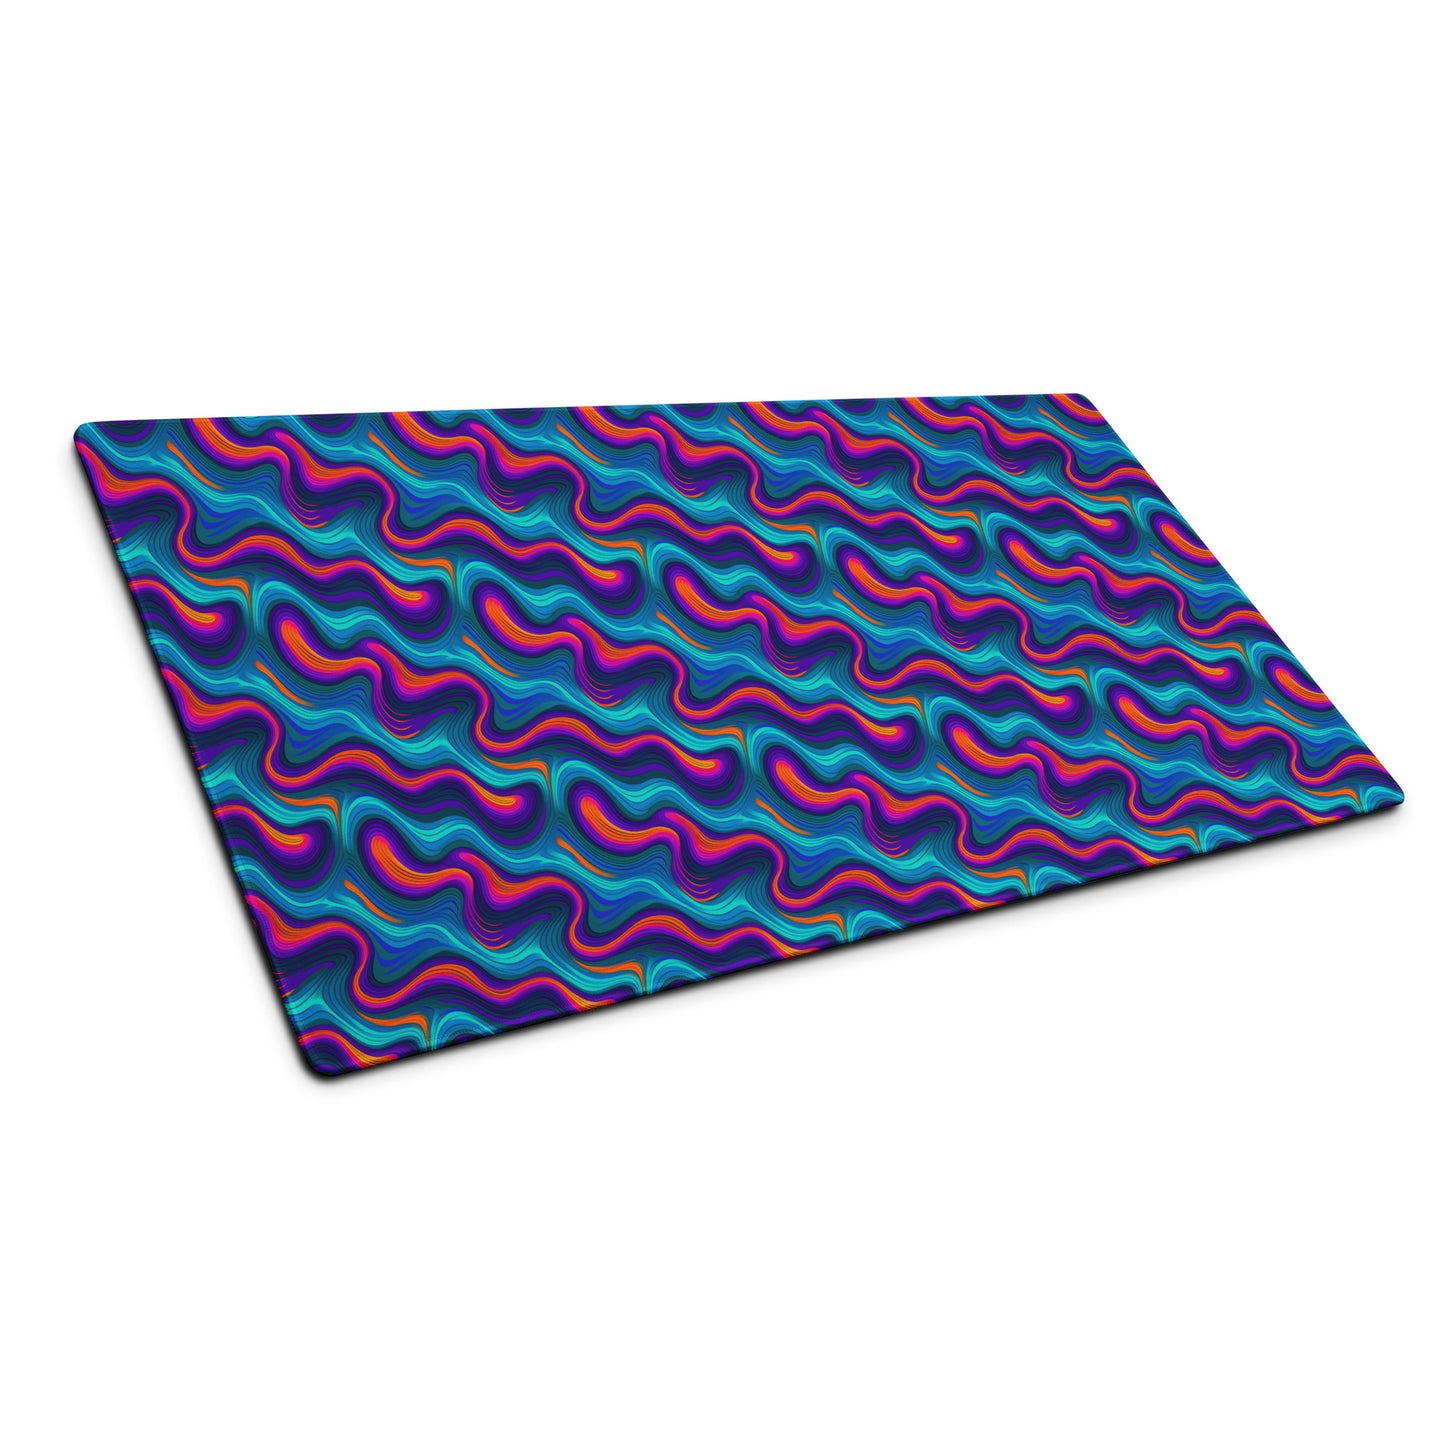 A 36" x 18" desk pad with blue and orange wavy pattern sitting at an angle.